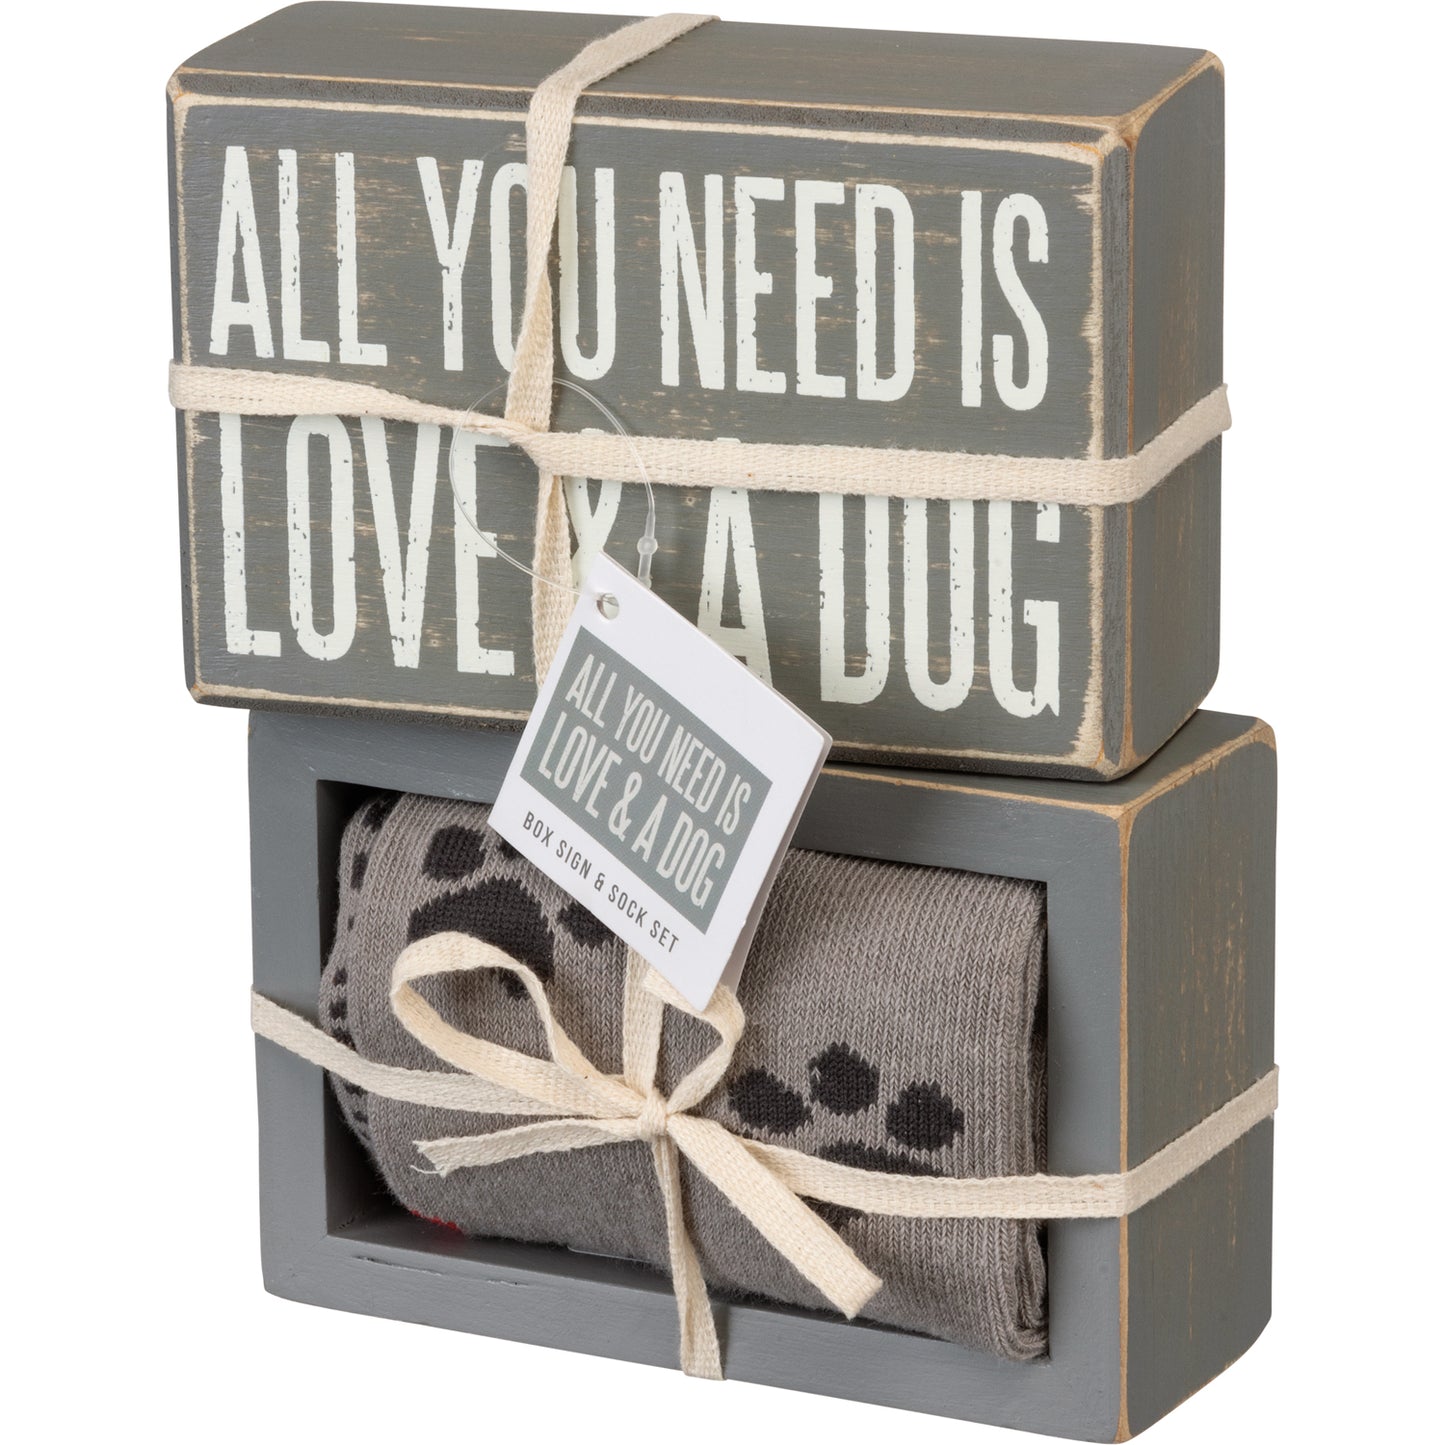 Socks & Box Sign Set "All You Need Is Love & A Dog"